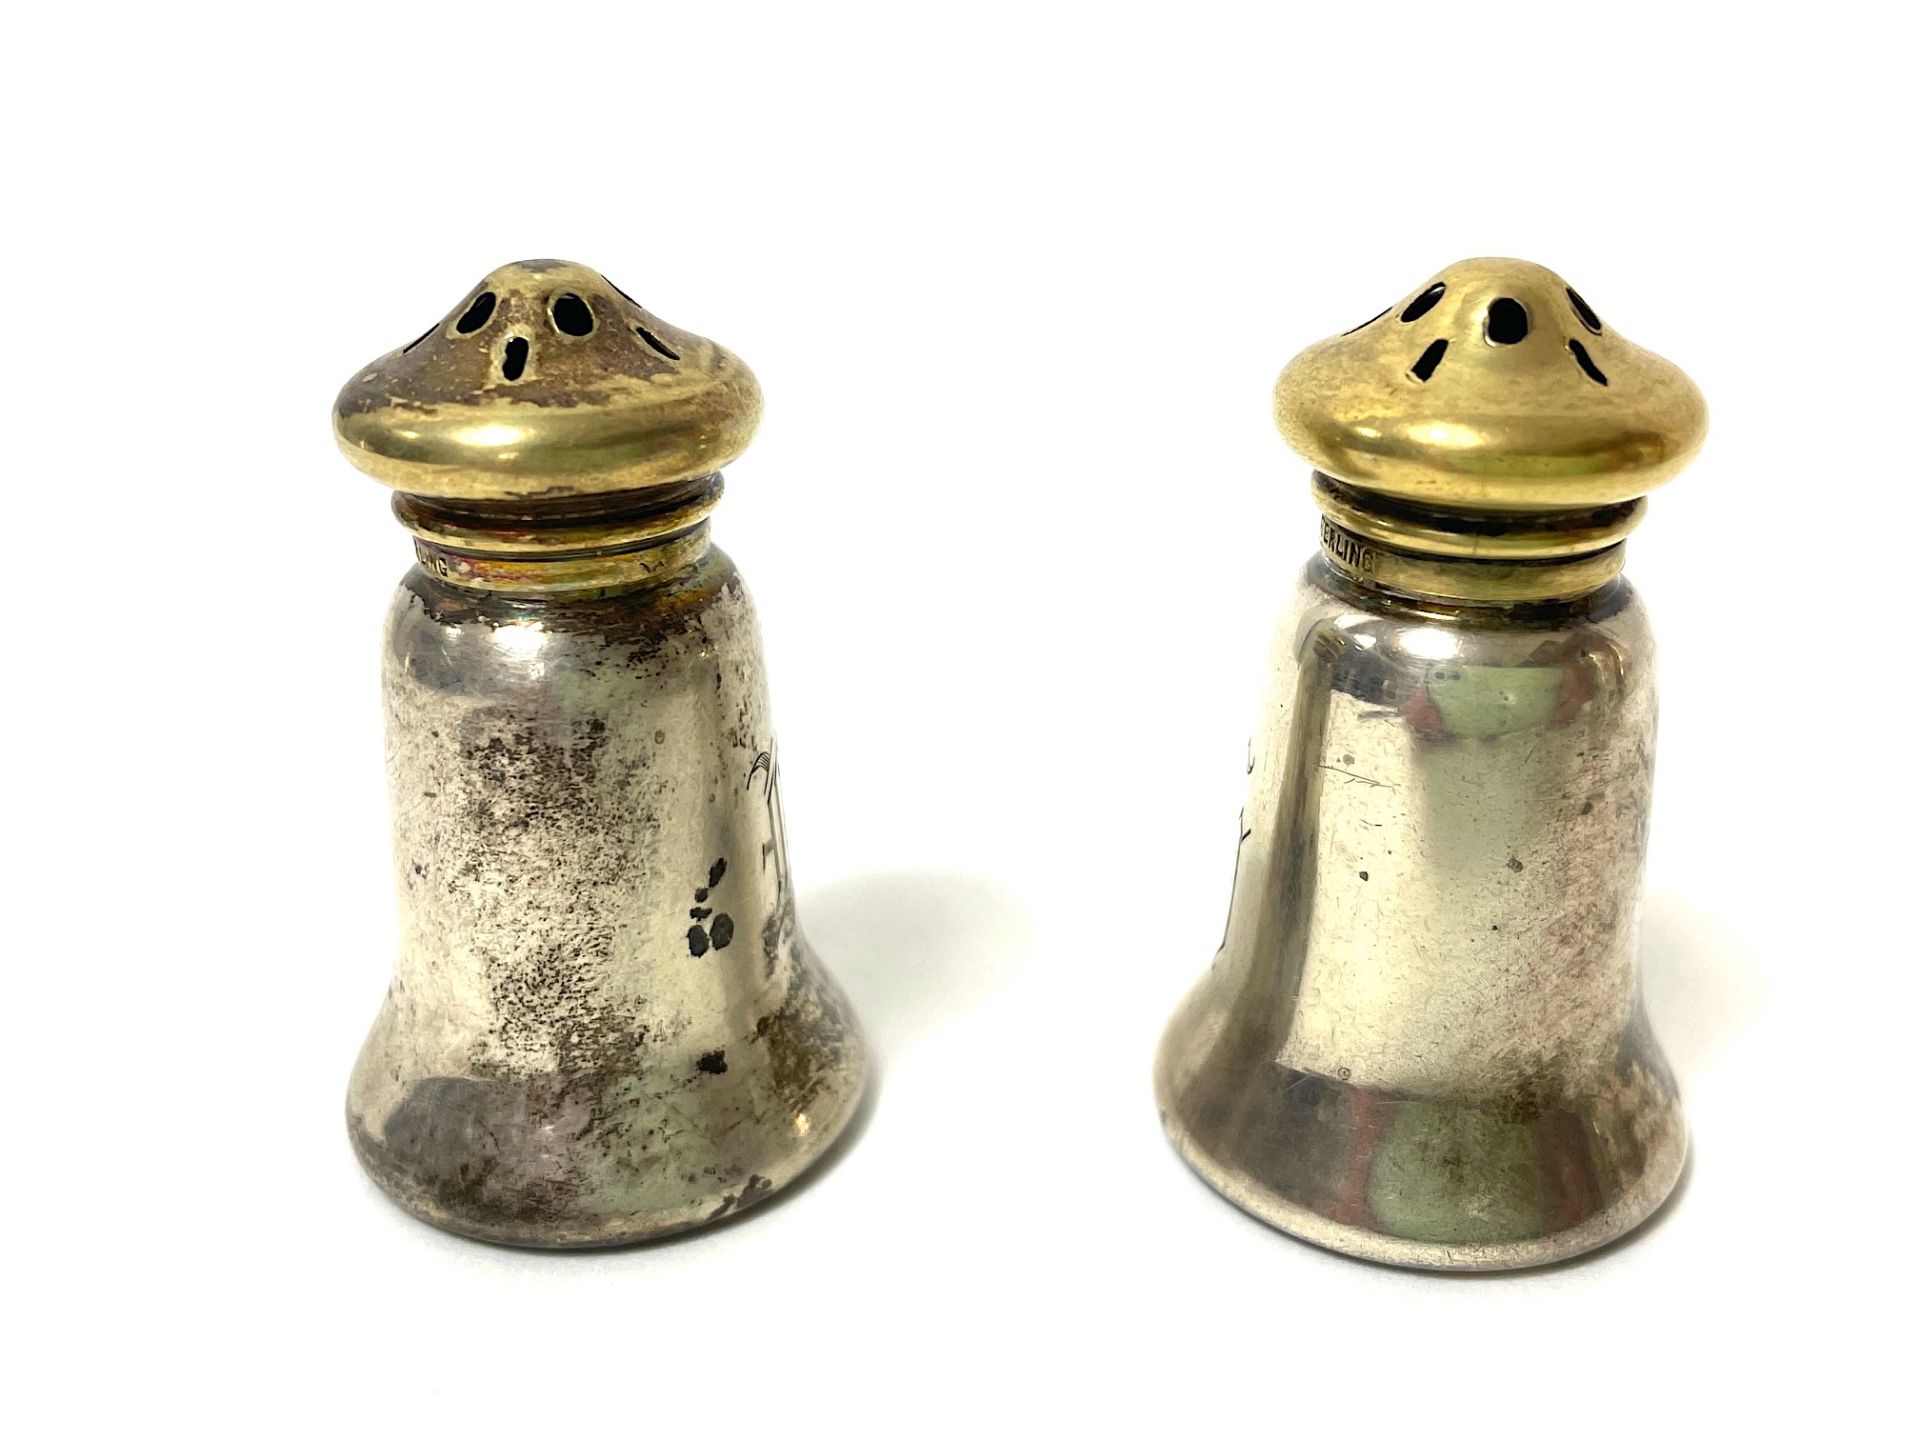 40 pairs of salt/pepper and spice shakers, - Image 66 of 88